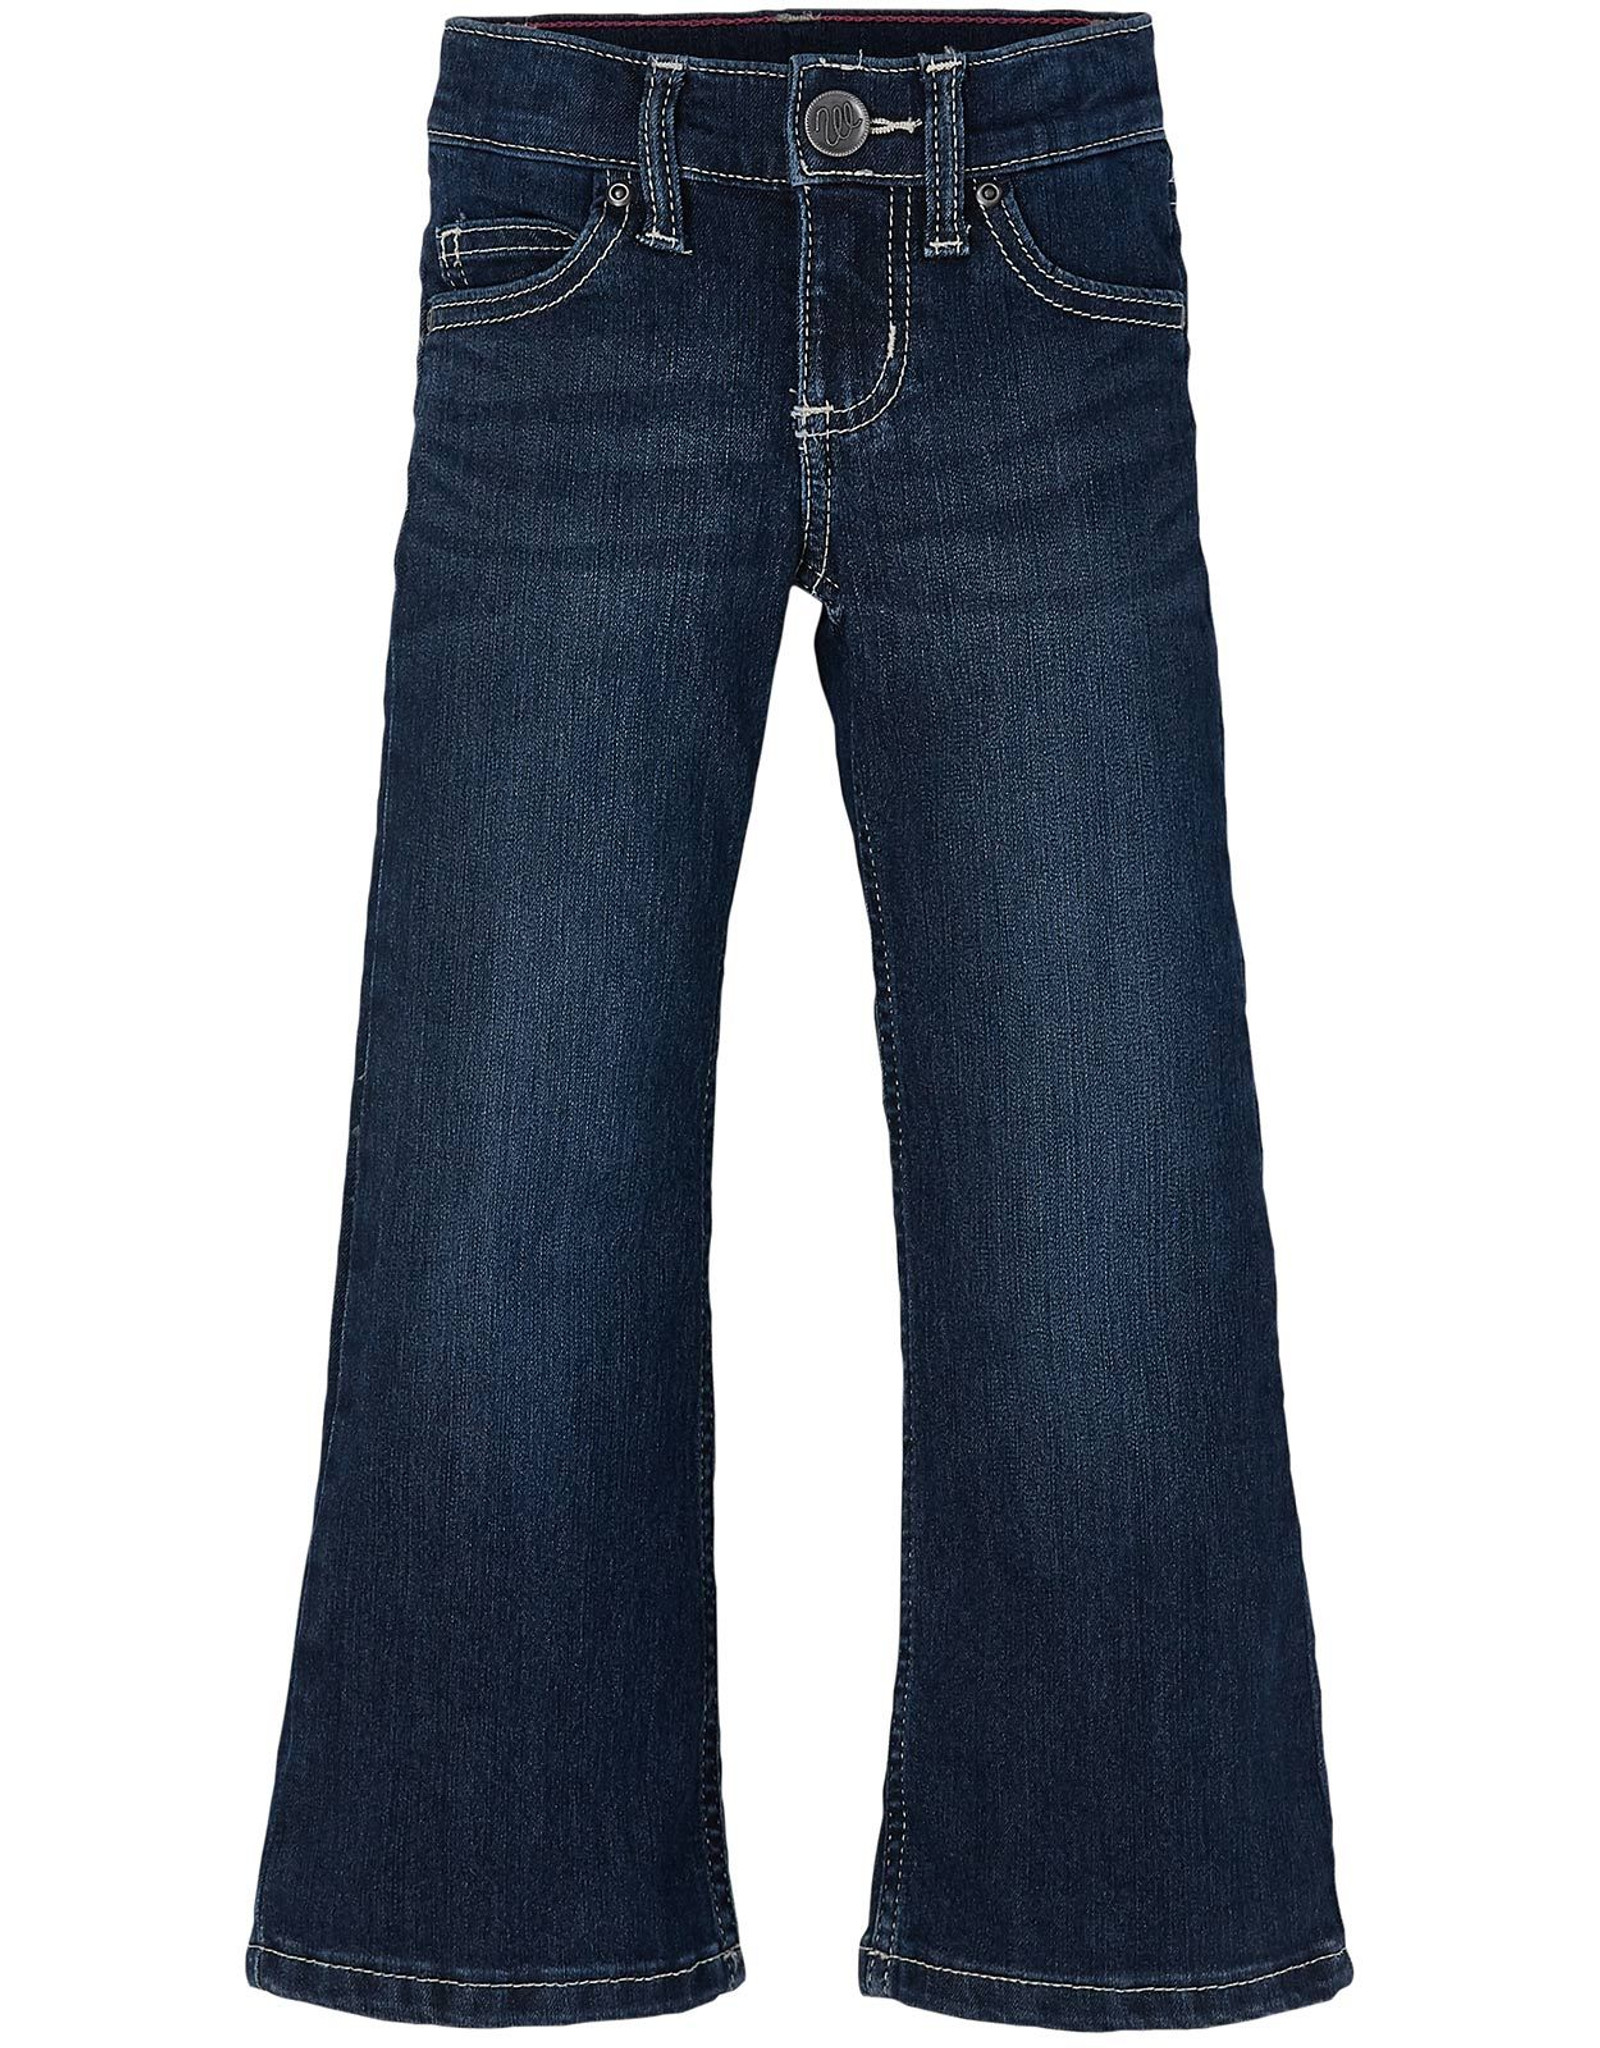 New Jeans for Girls - Buy Stylish Denim Jeans Online | ONLY